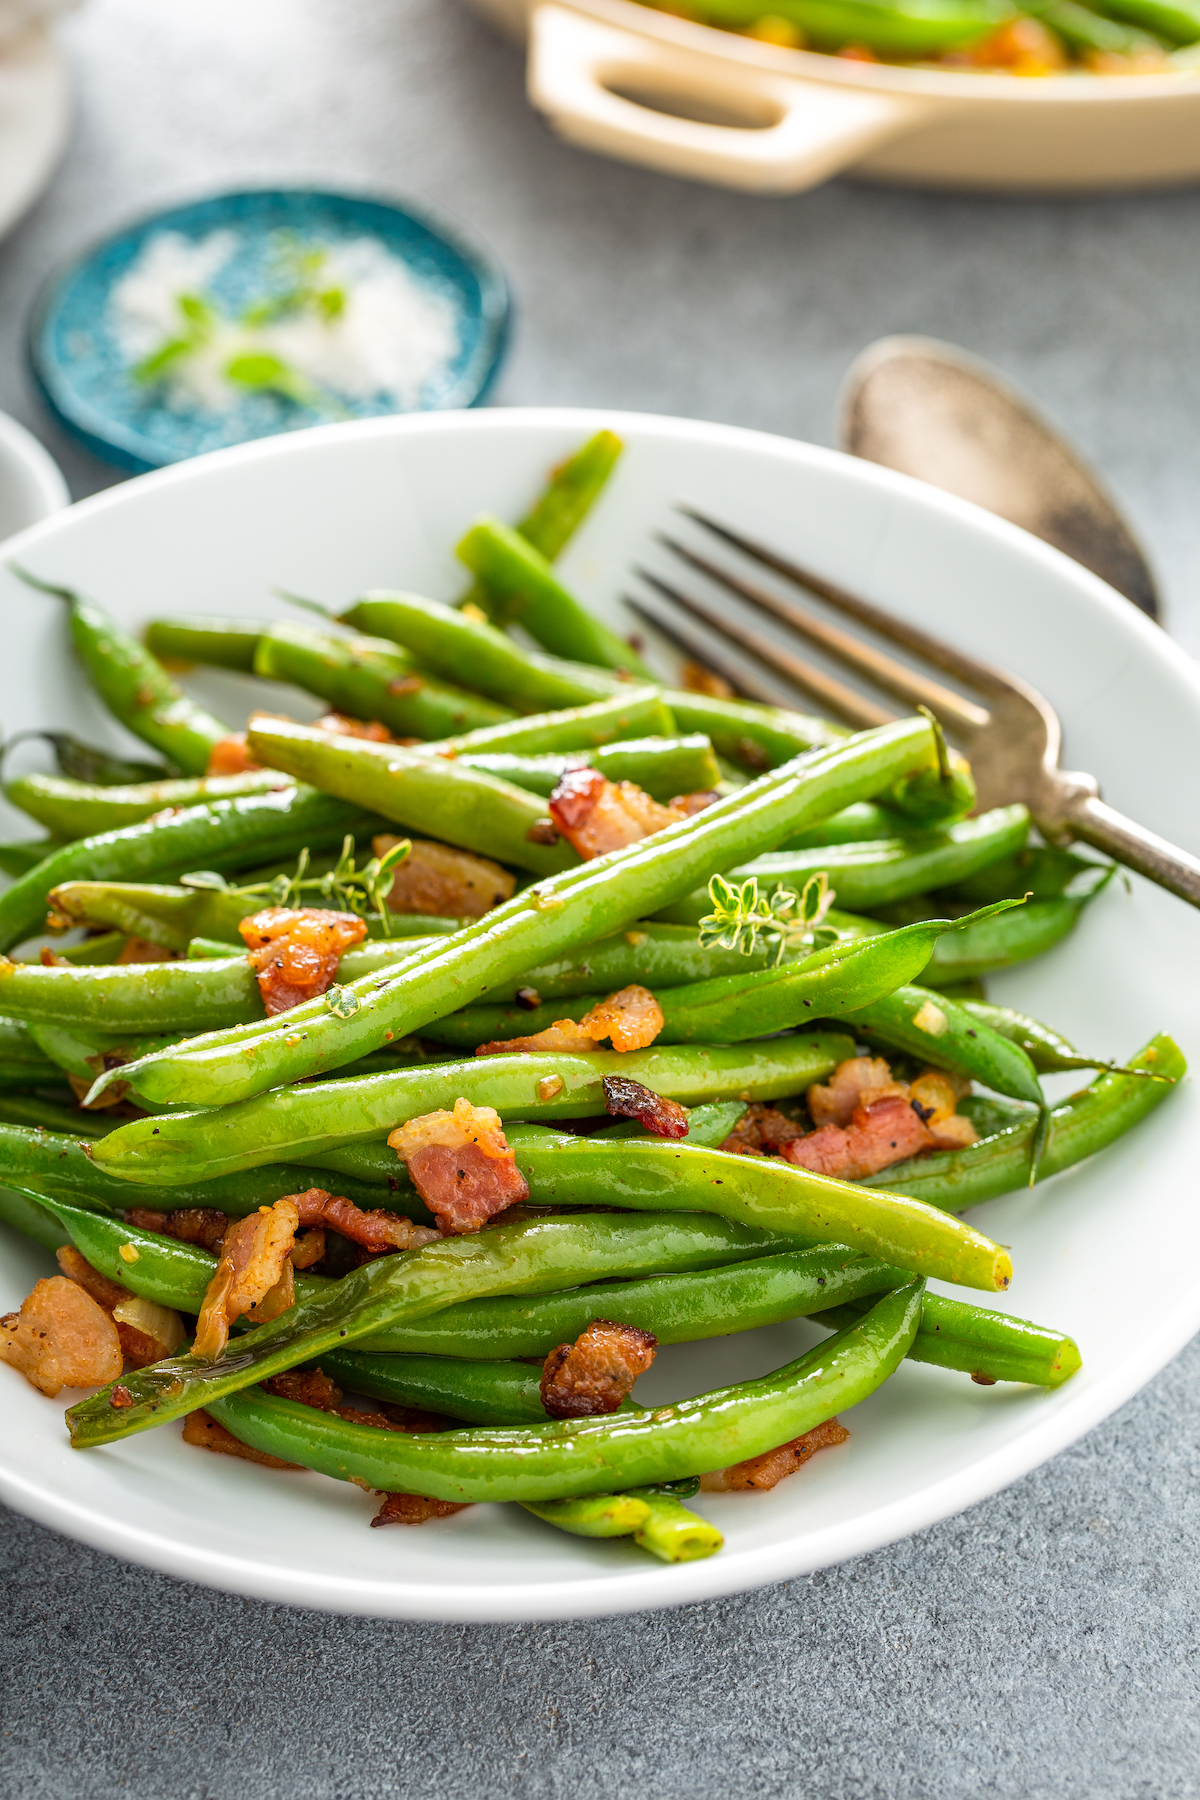 Serving of green beans with bacon bits.